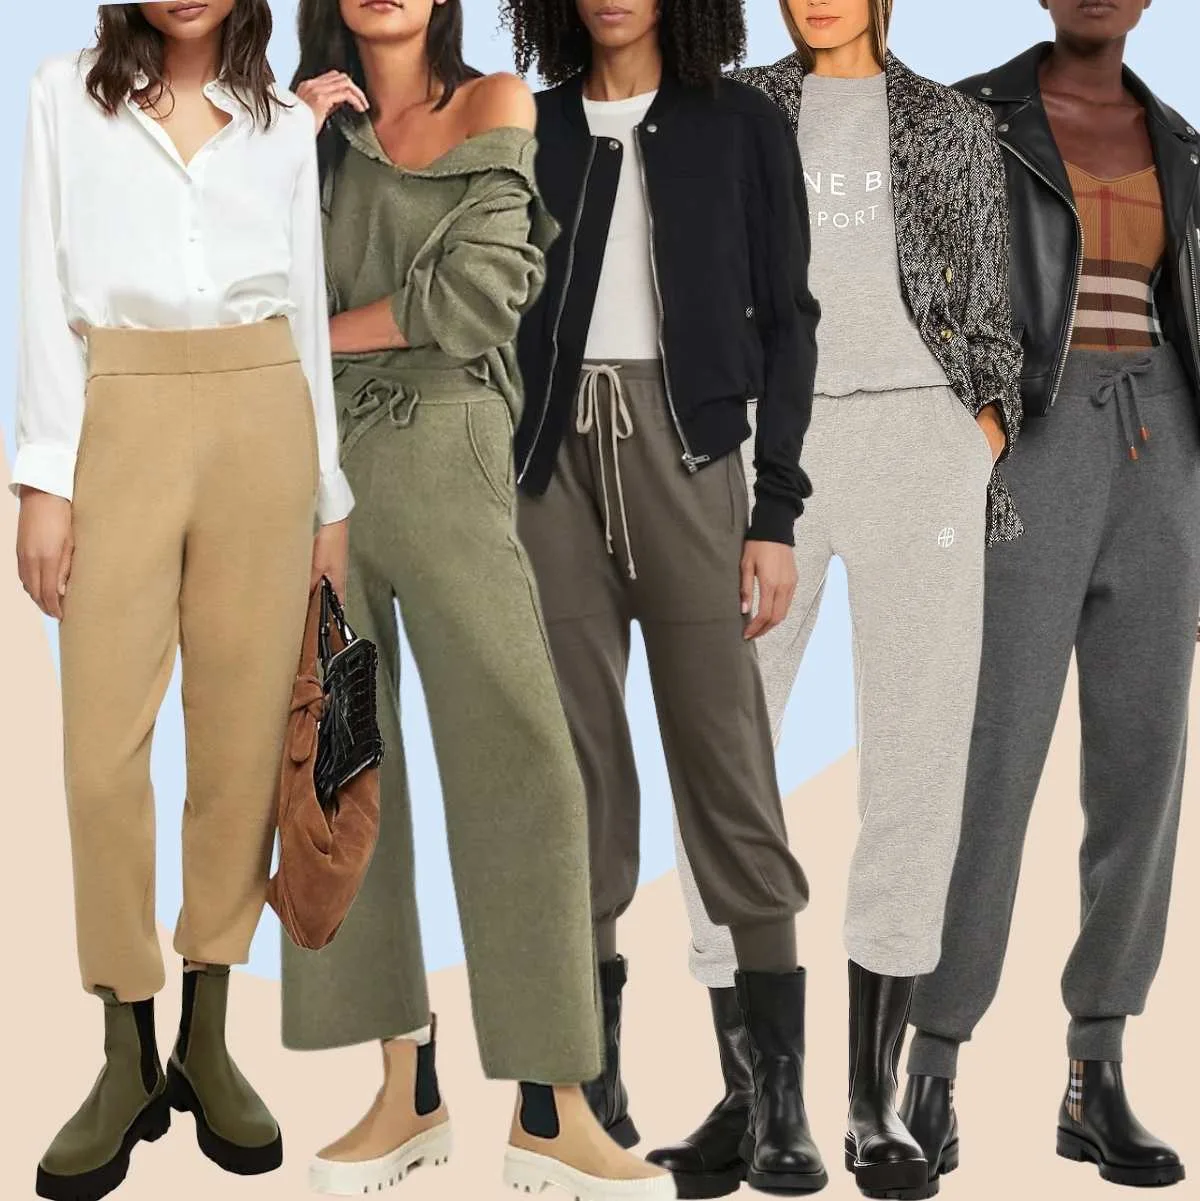 Millennial Style: Lugsole Boots with Wide Leg Pants